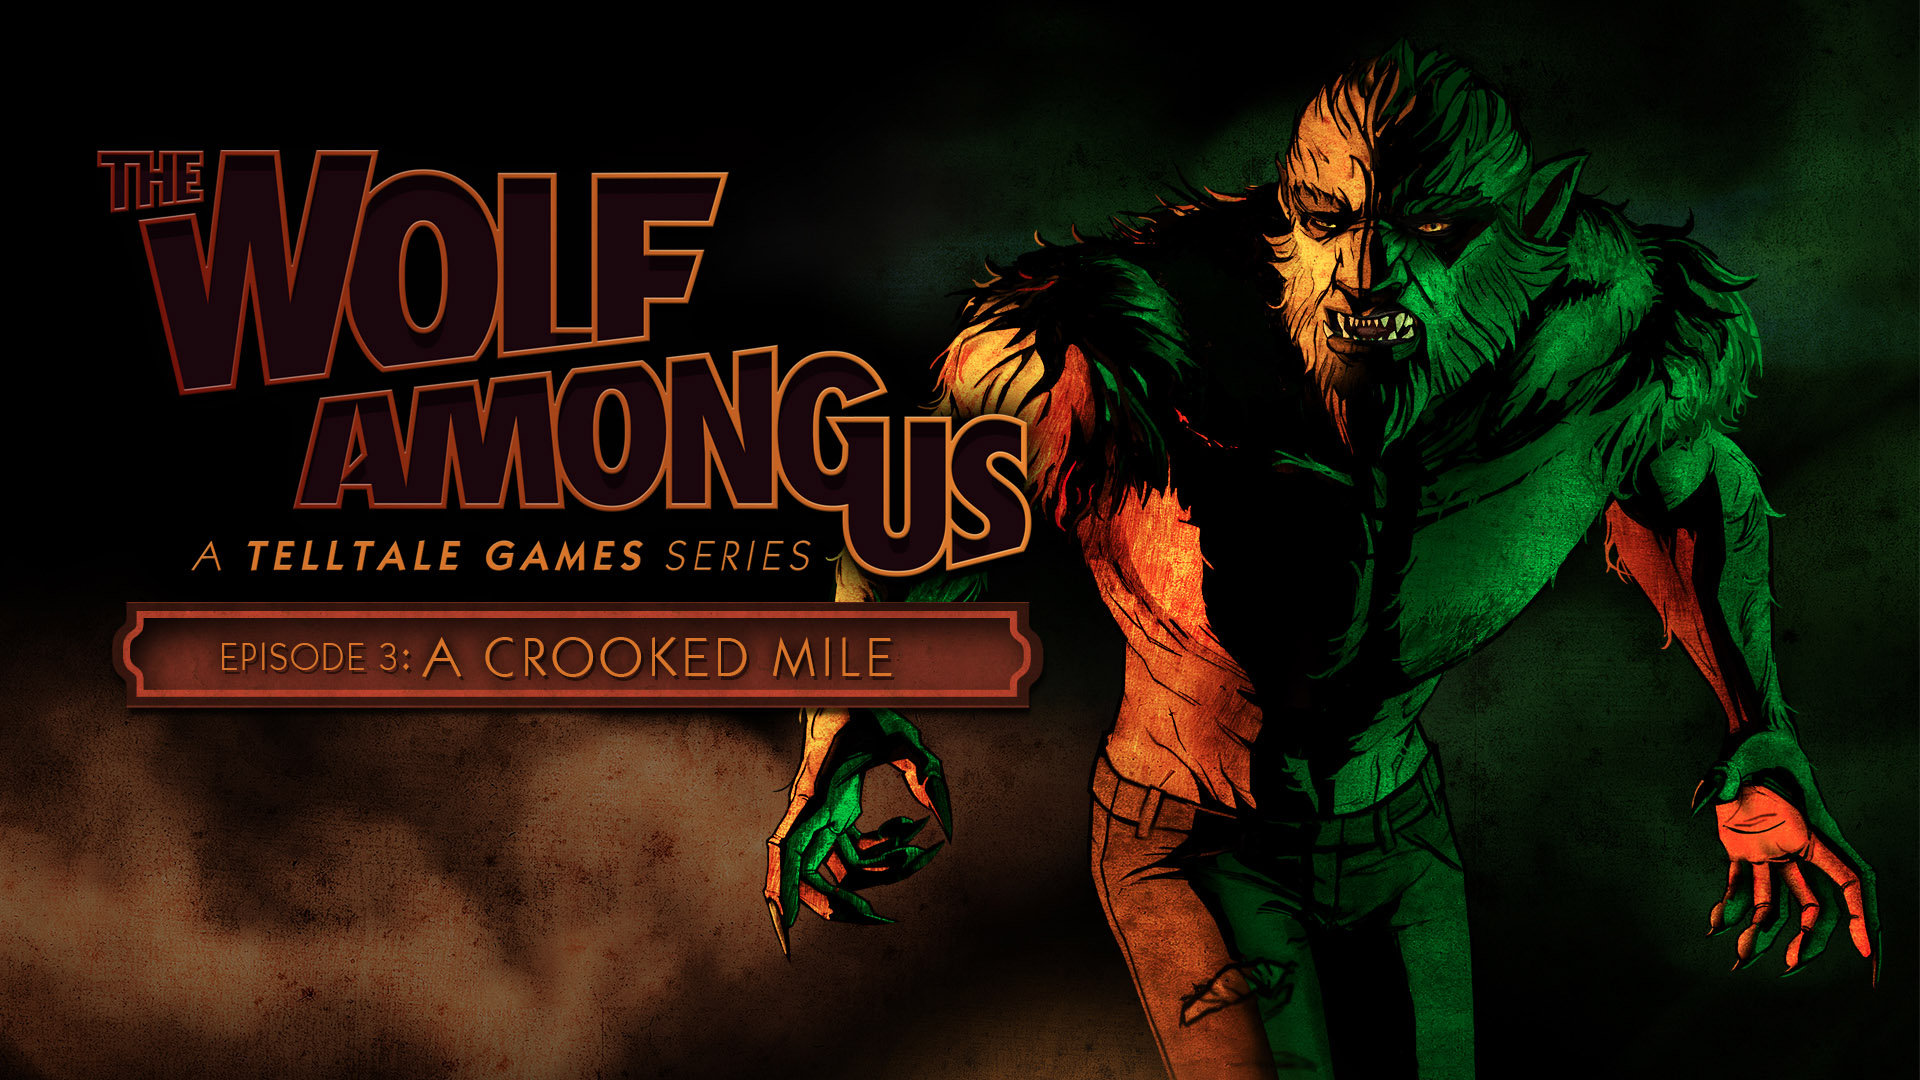 The Wolf Among Us Episode 3: A Crooked Mile review